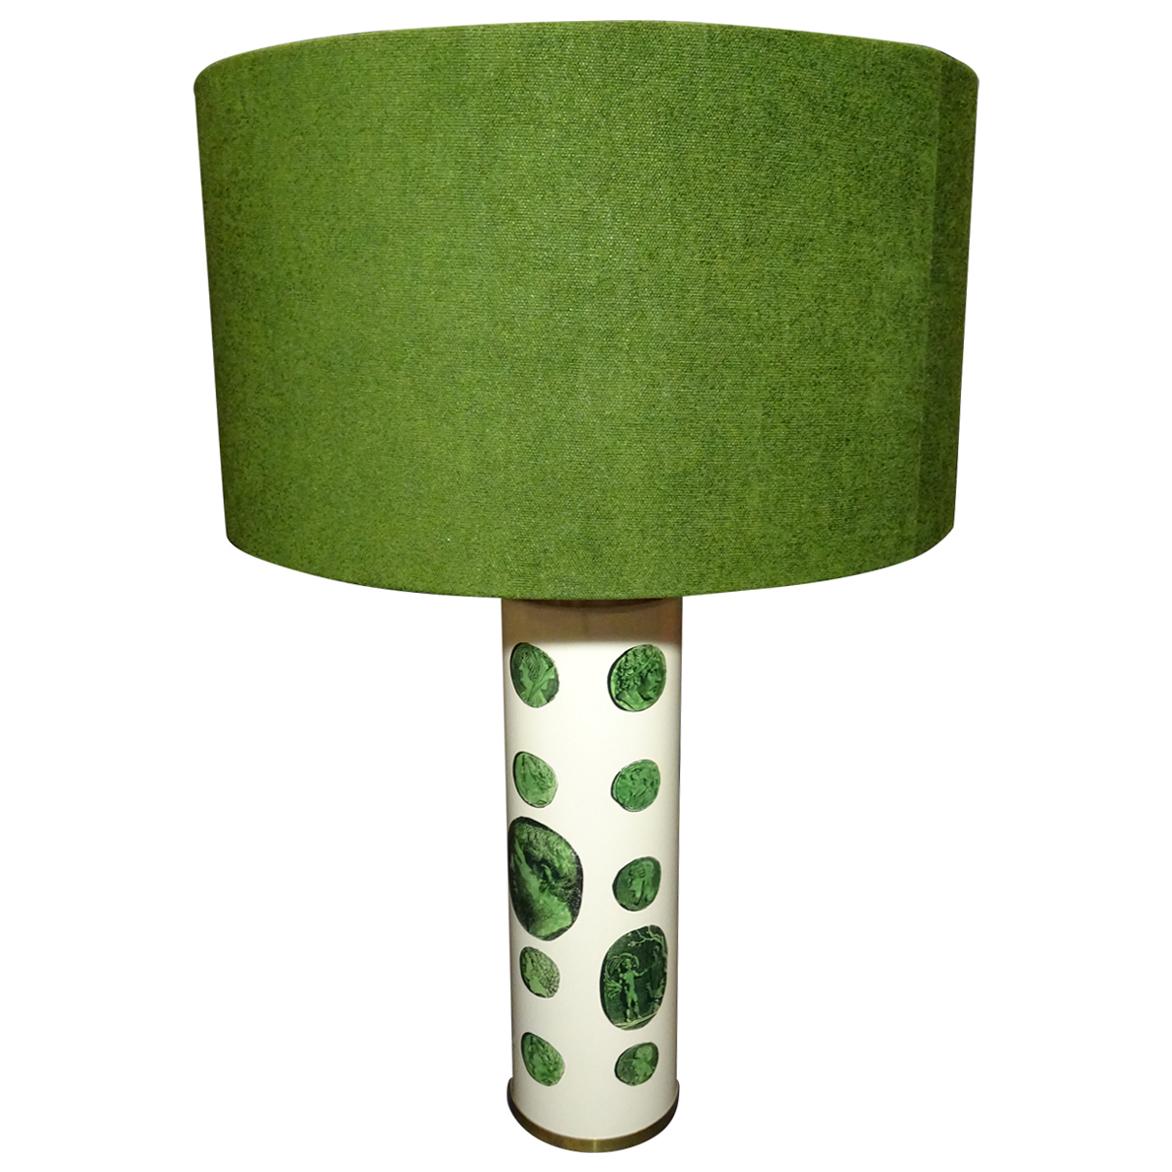 Fornasetti 1970s Green White Italian Table Lamp with a Green Shade, Label